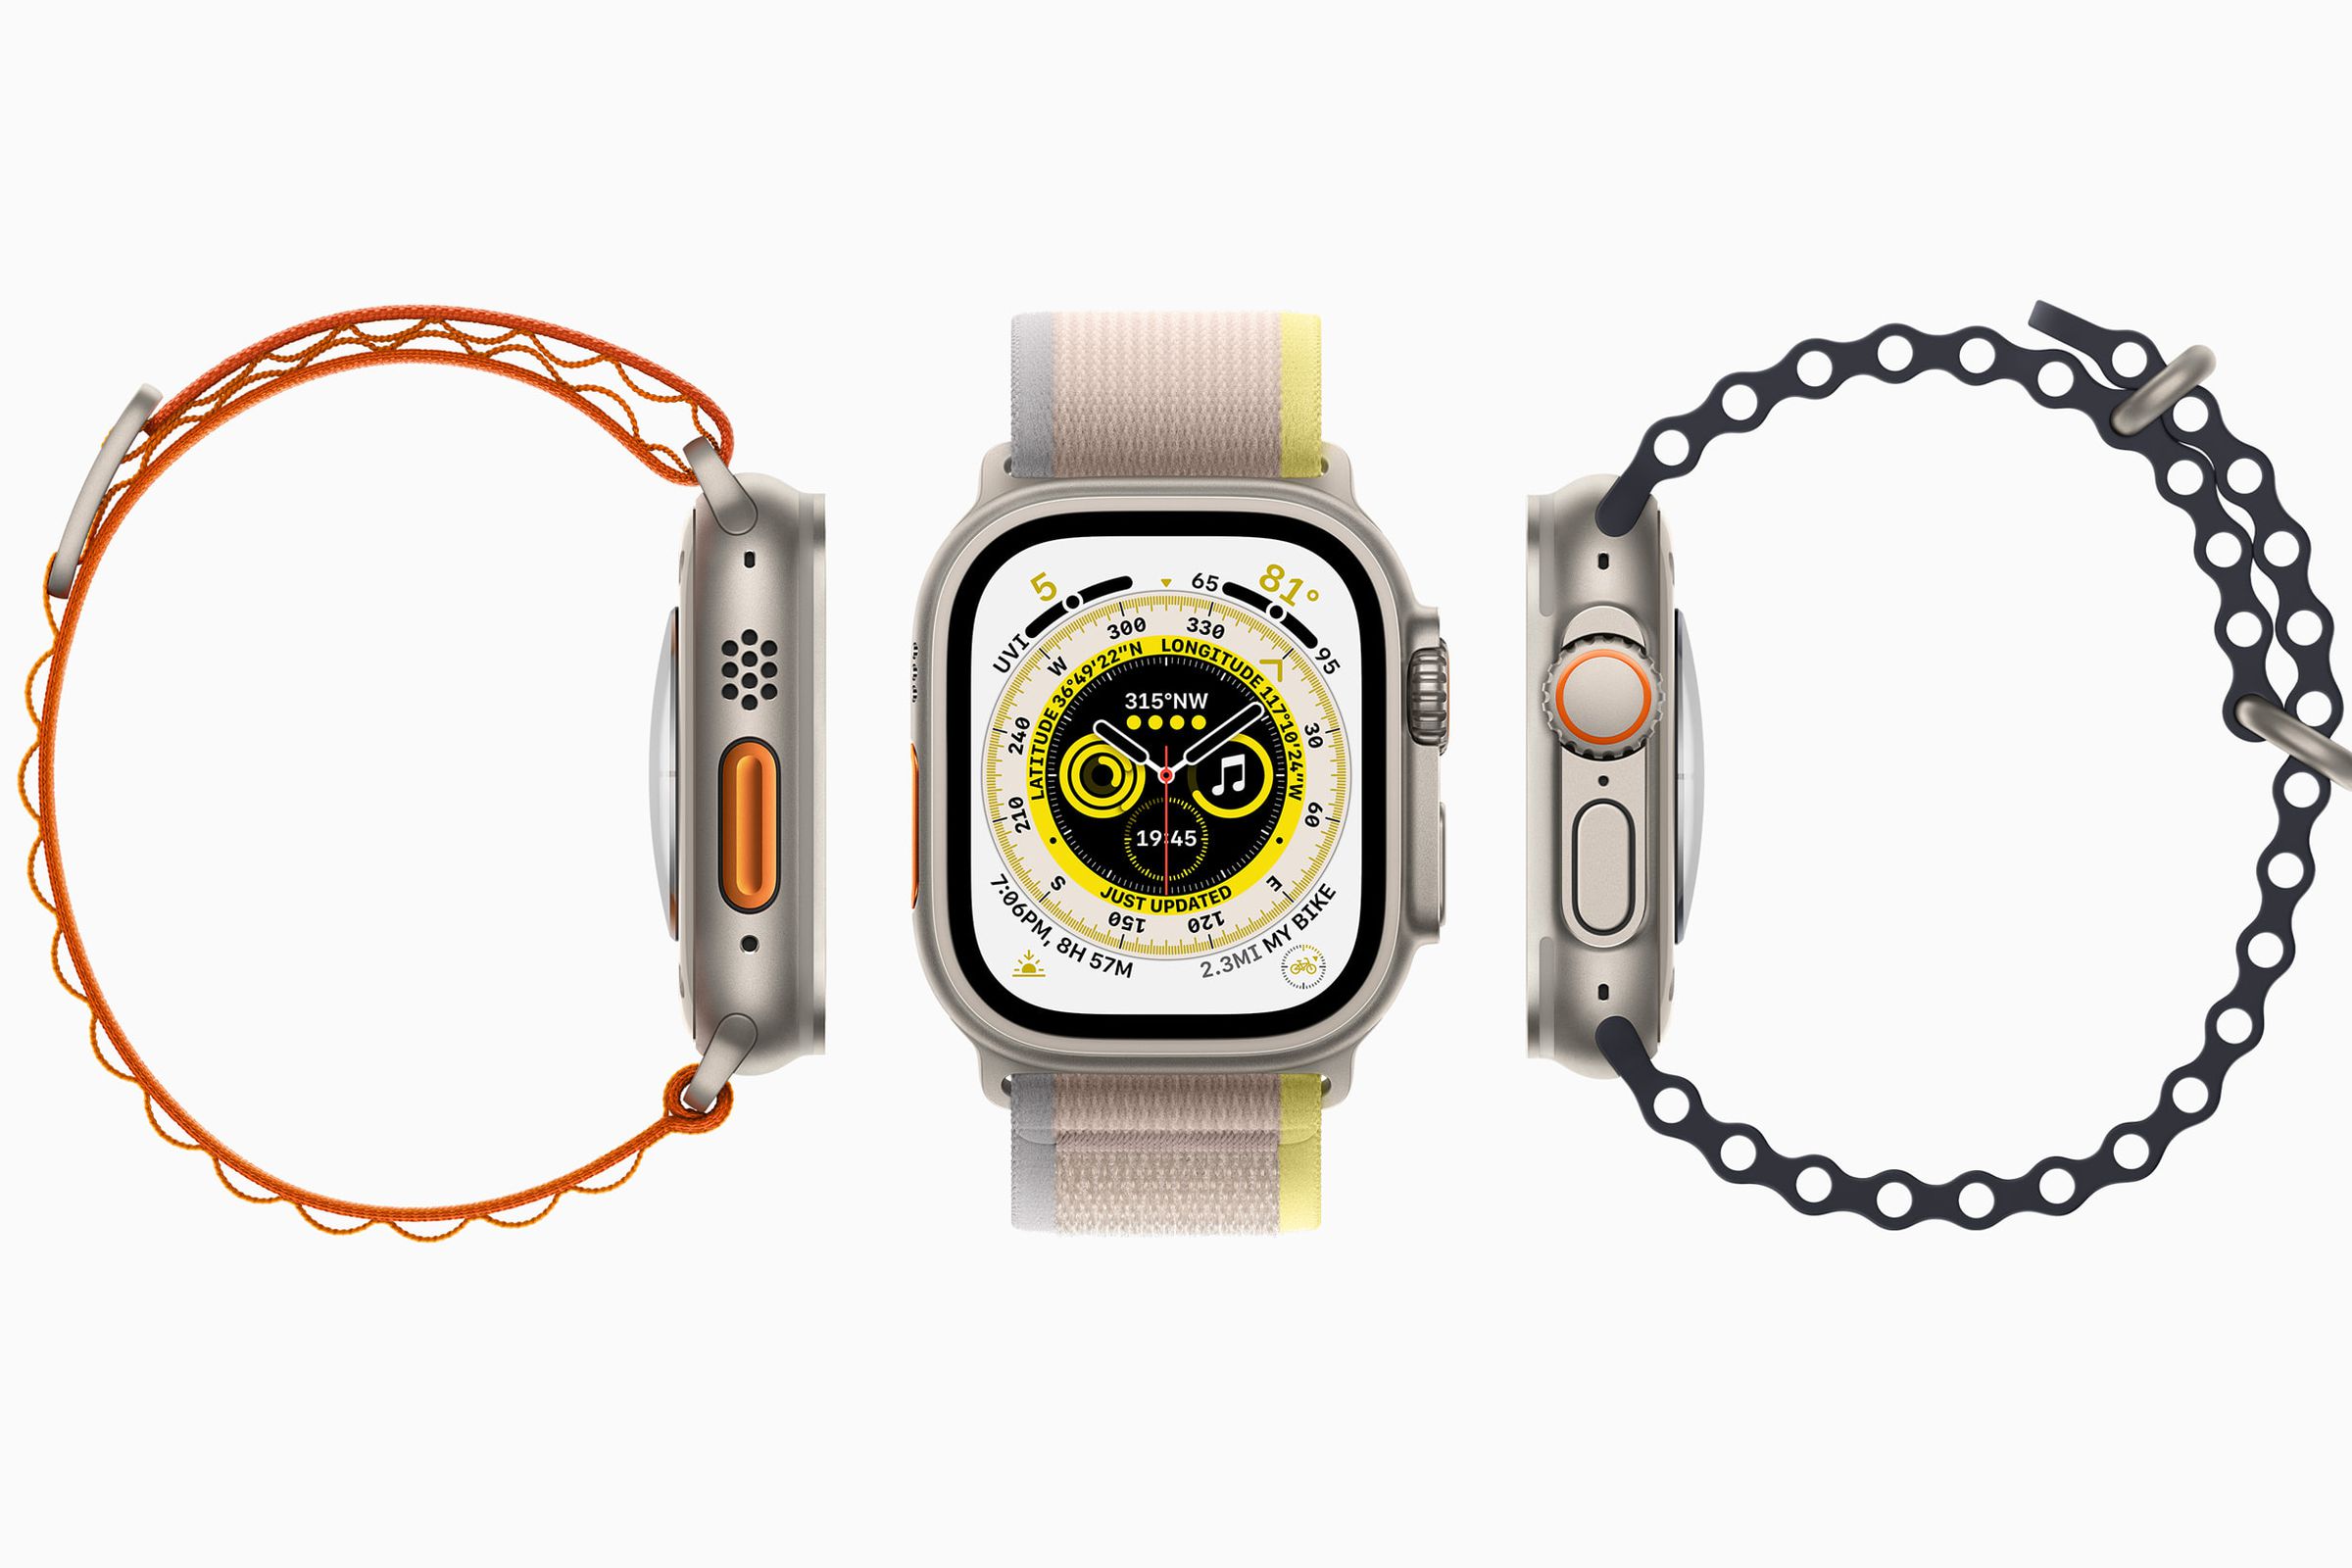 Image of three Apple Watch Ultras, one showing the left side of the watch, one showing the screen, and one showing the right side of the watch.